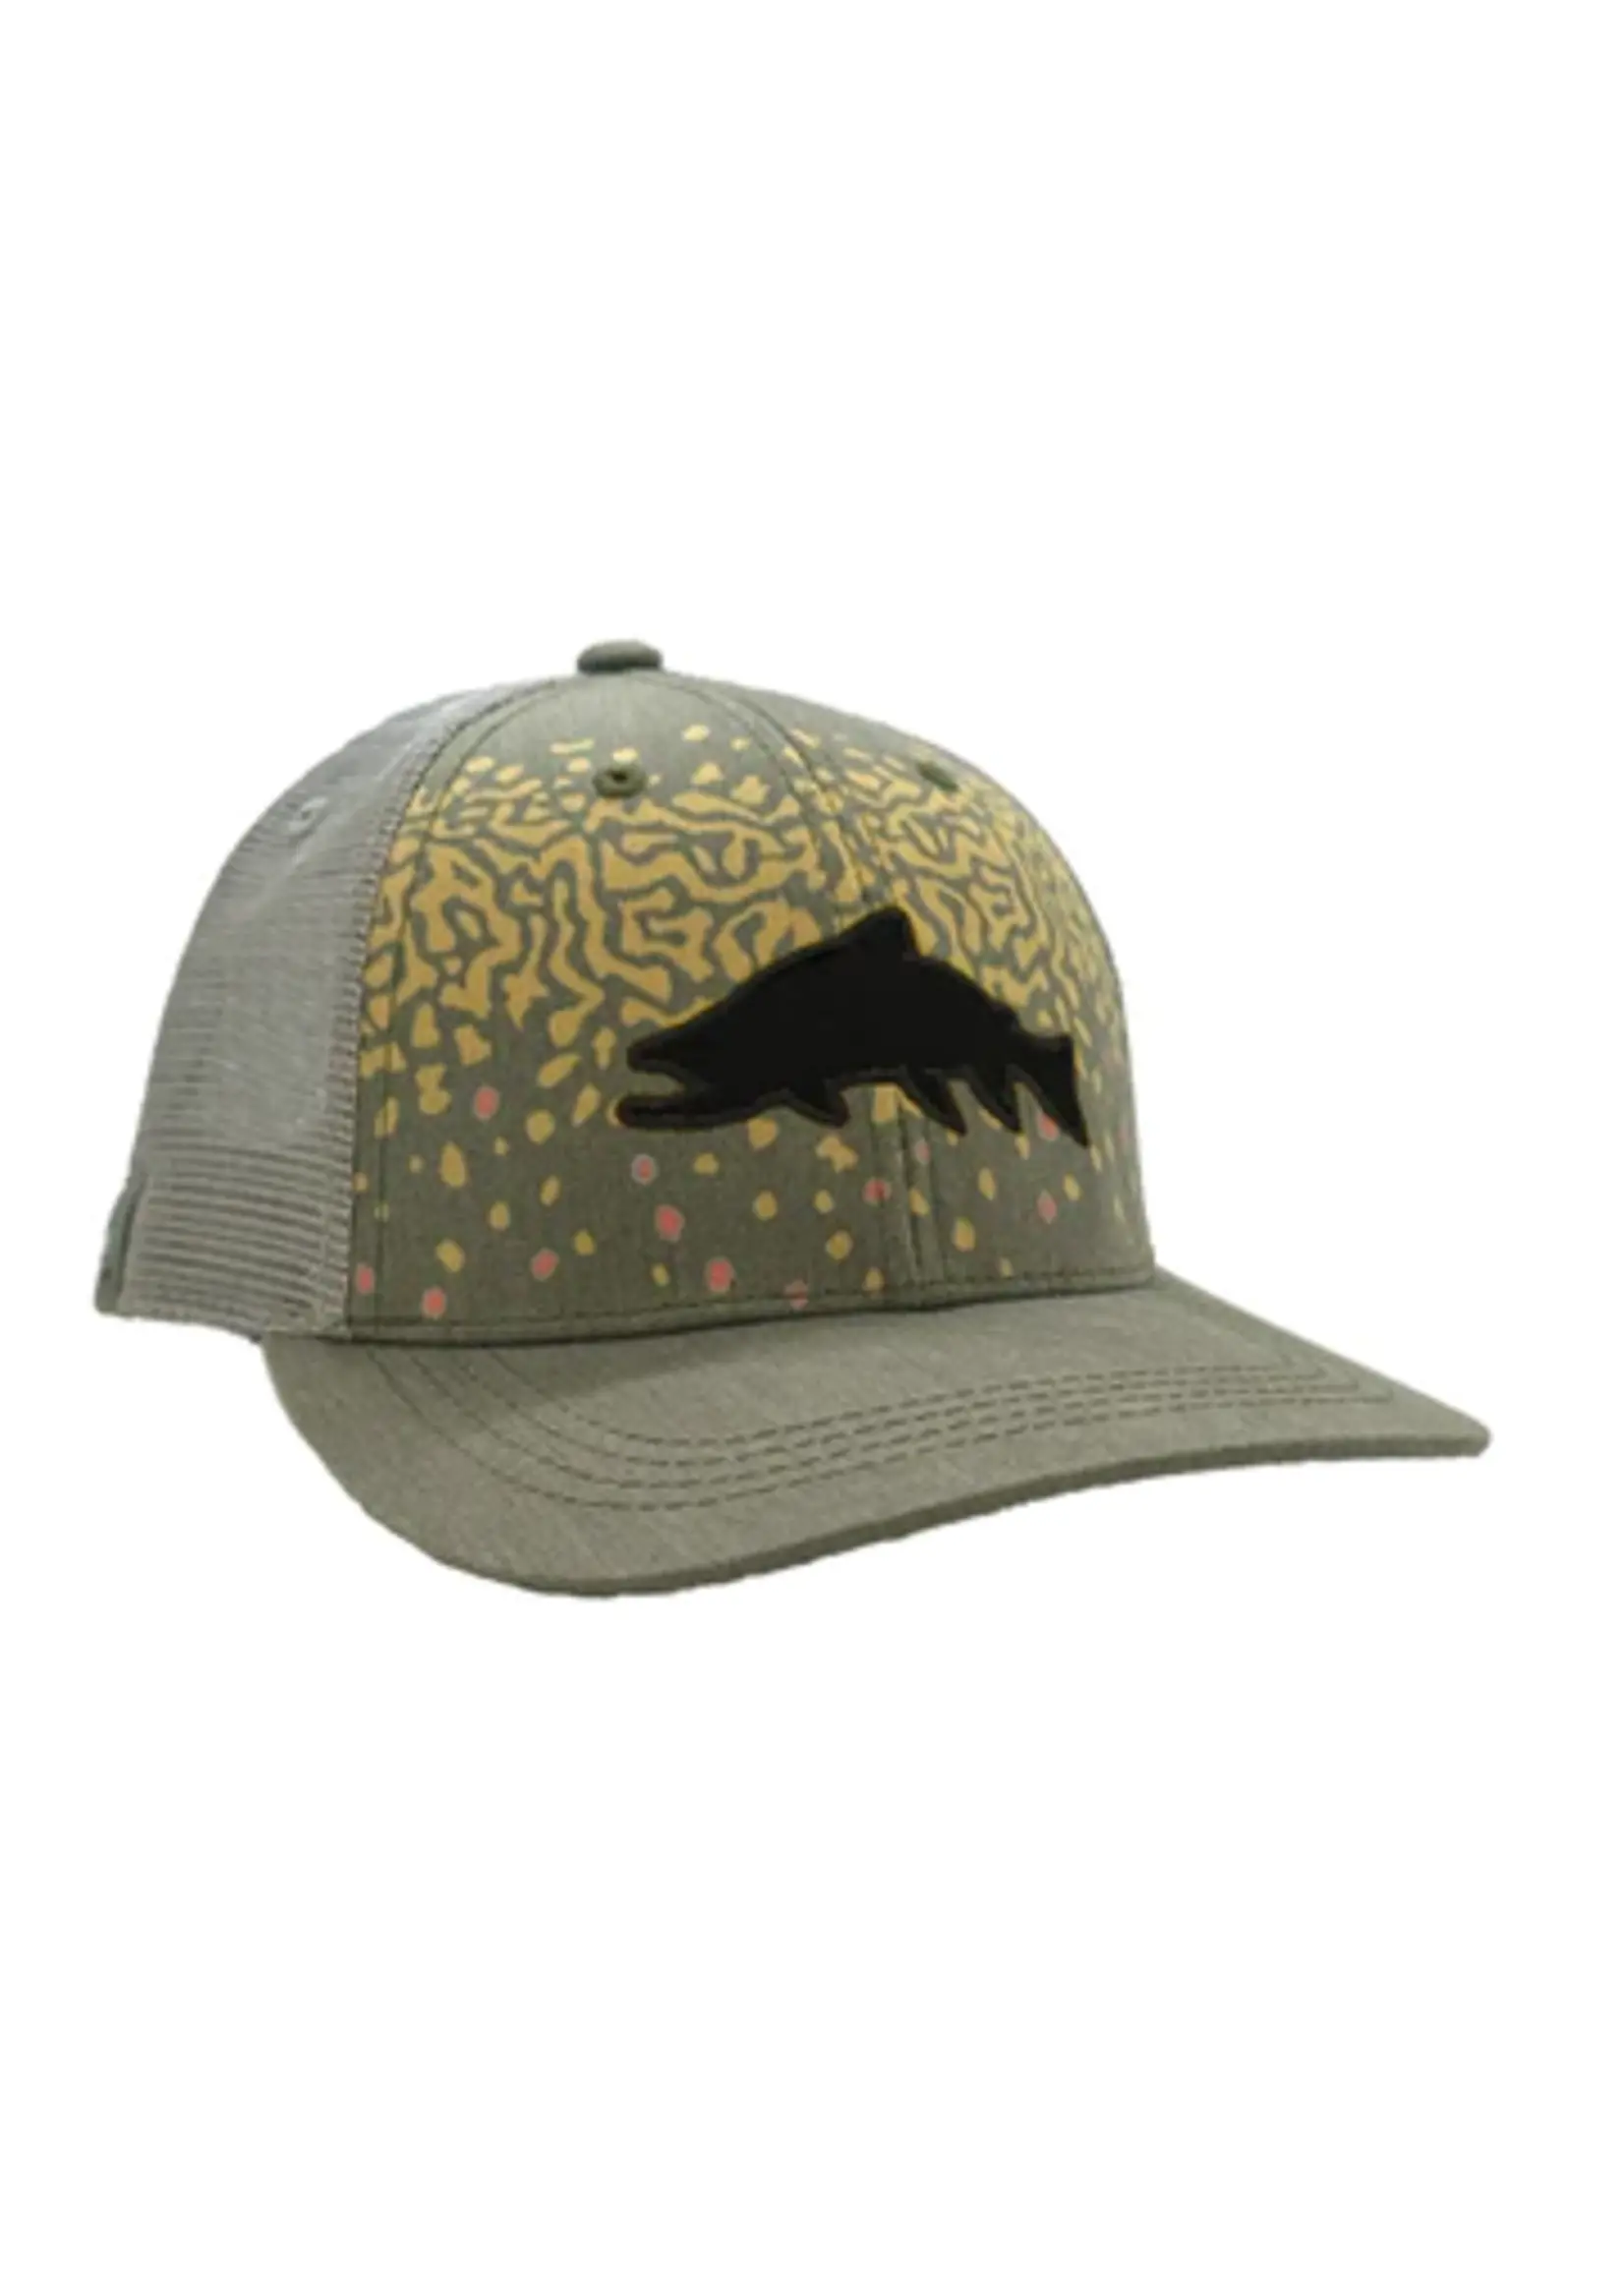 Rep Your Water RepYourWater Brook Trout Flank Hat